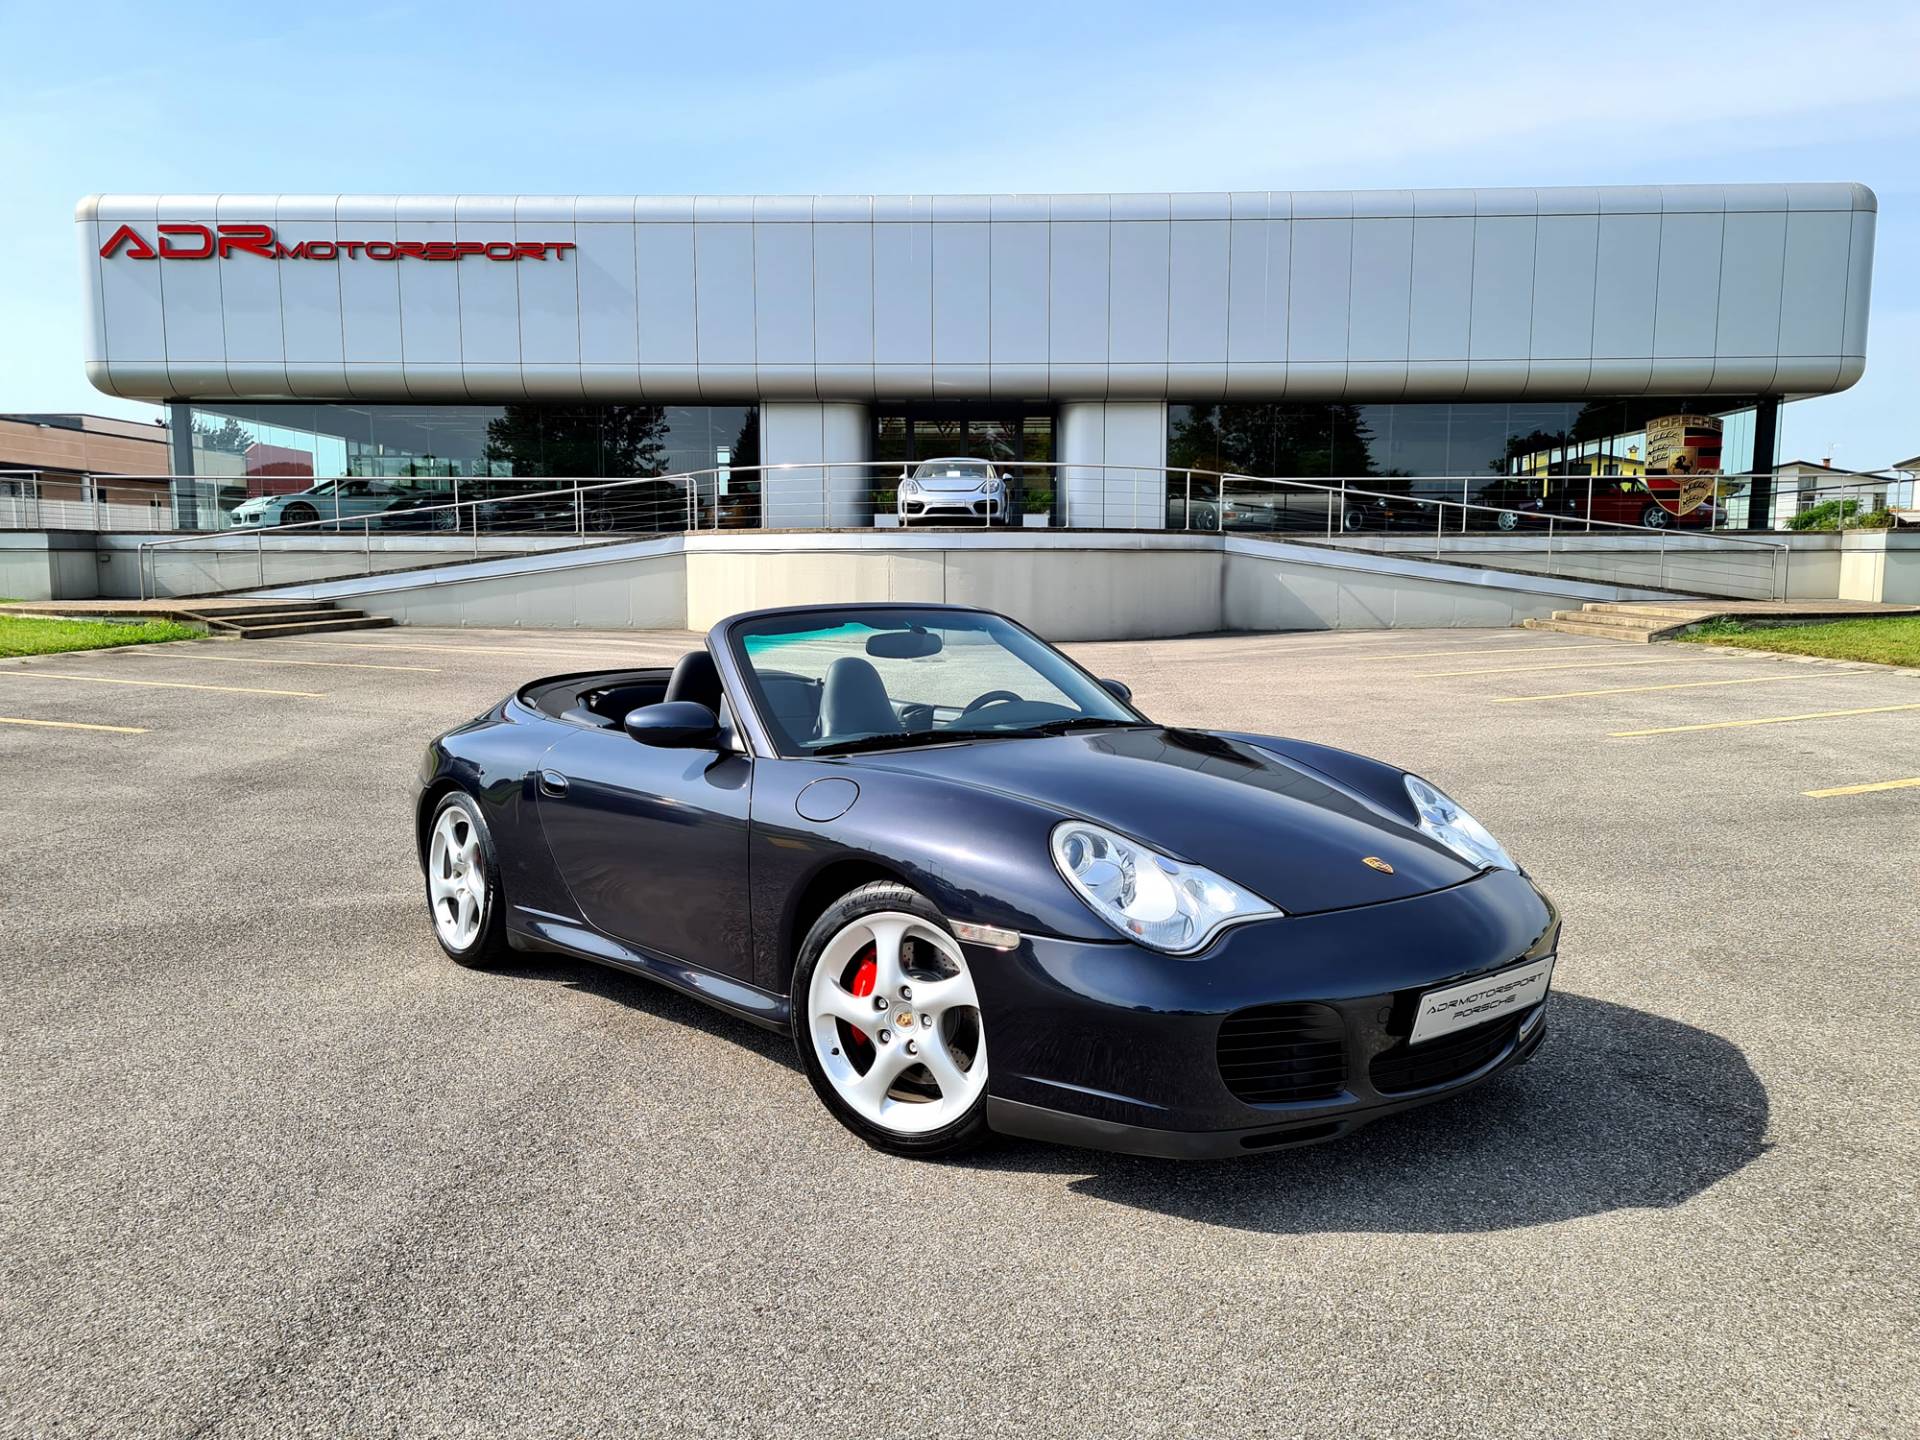 For Sale: Porsche 911 Carrera 4S (2004) offered for GBP 53,372